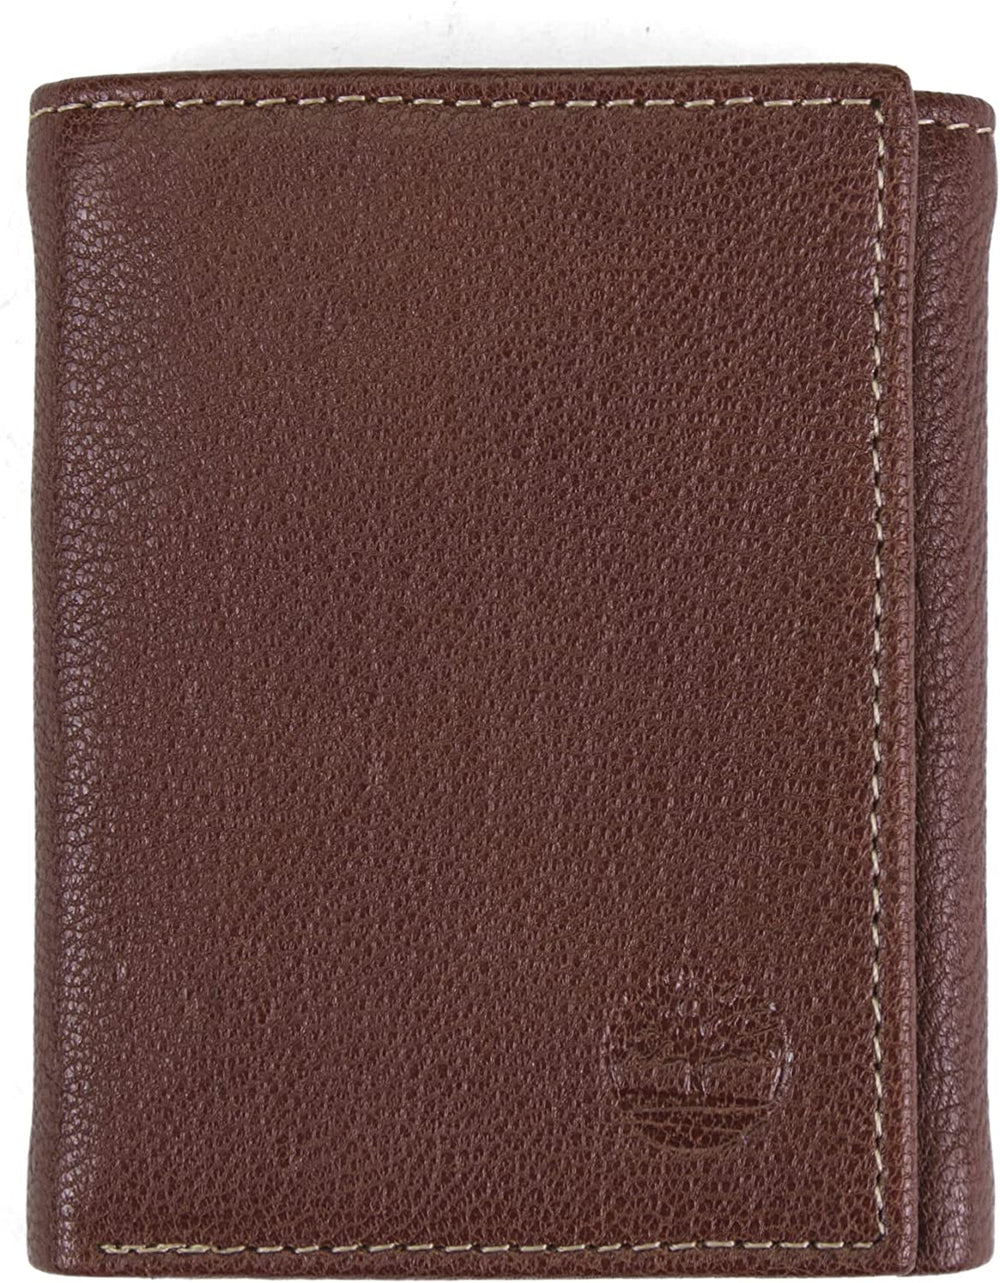 Timberland Men's Leather Trifold Wallet with Id Window Brown D97018 - 3alababak